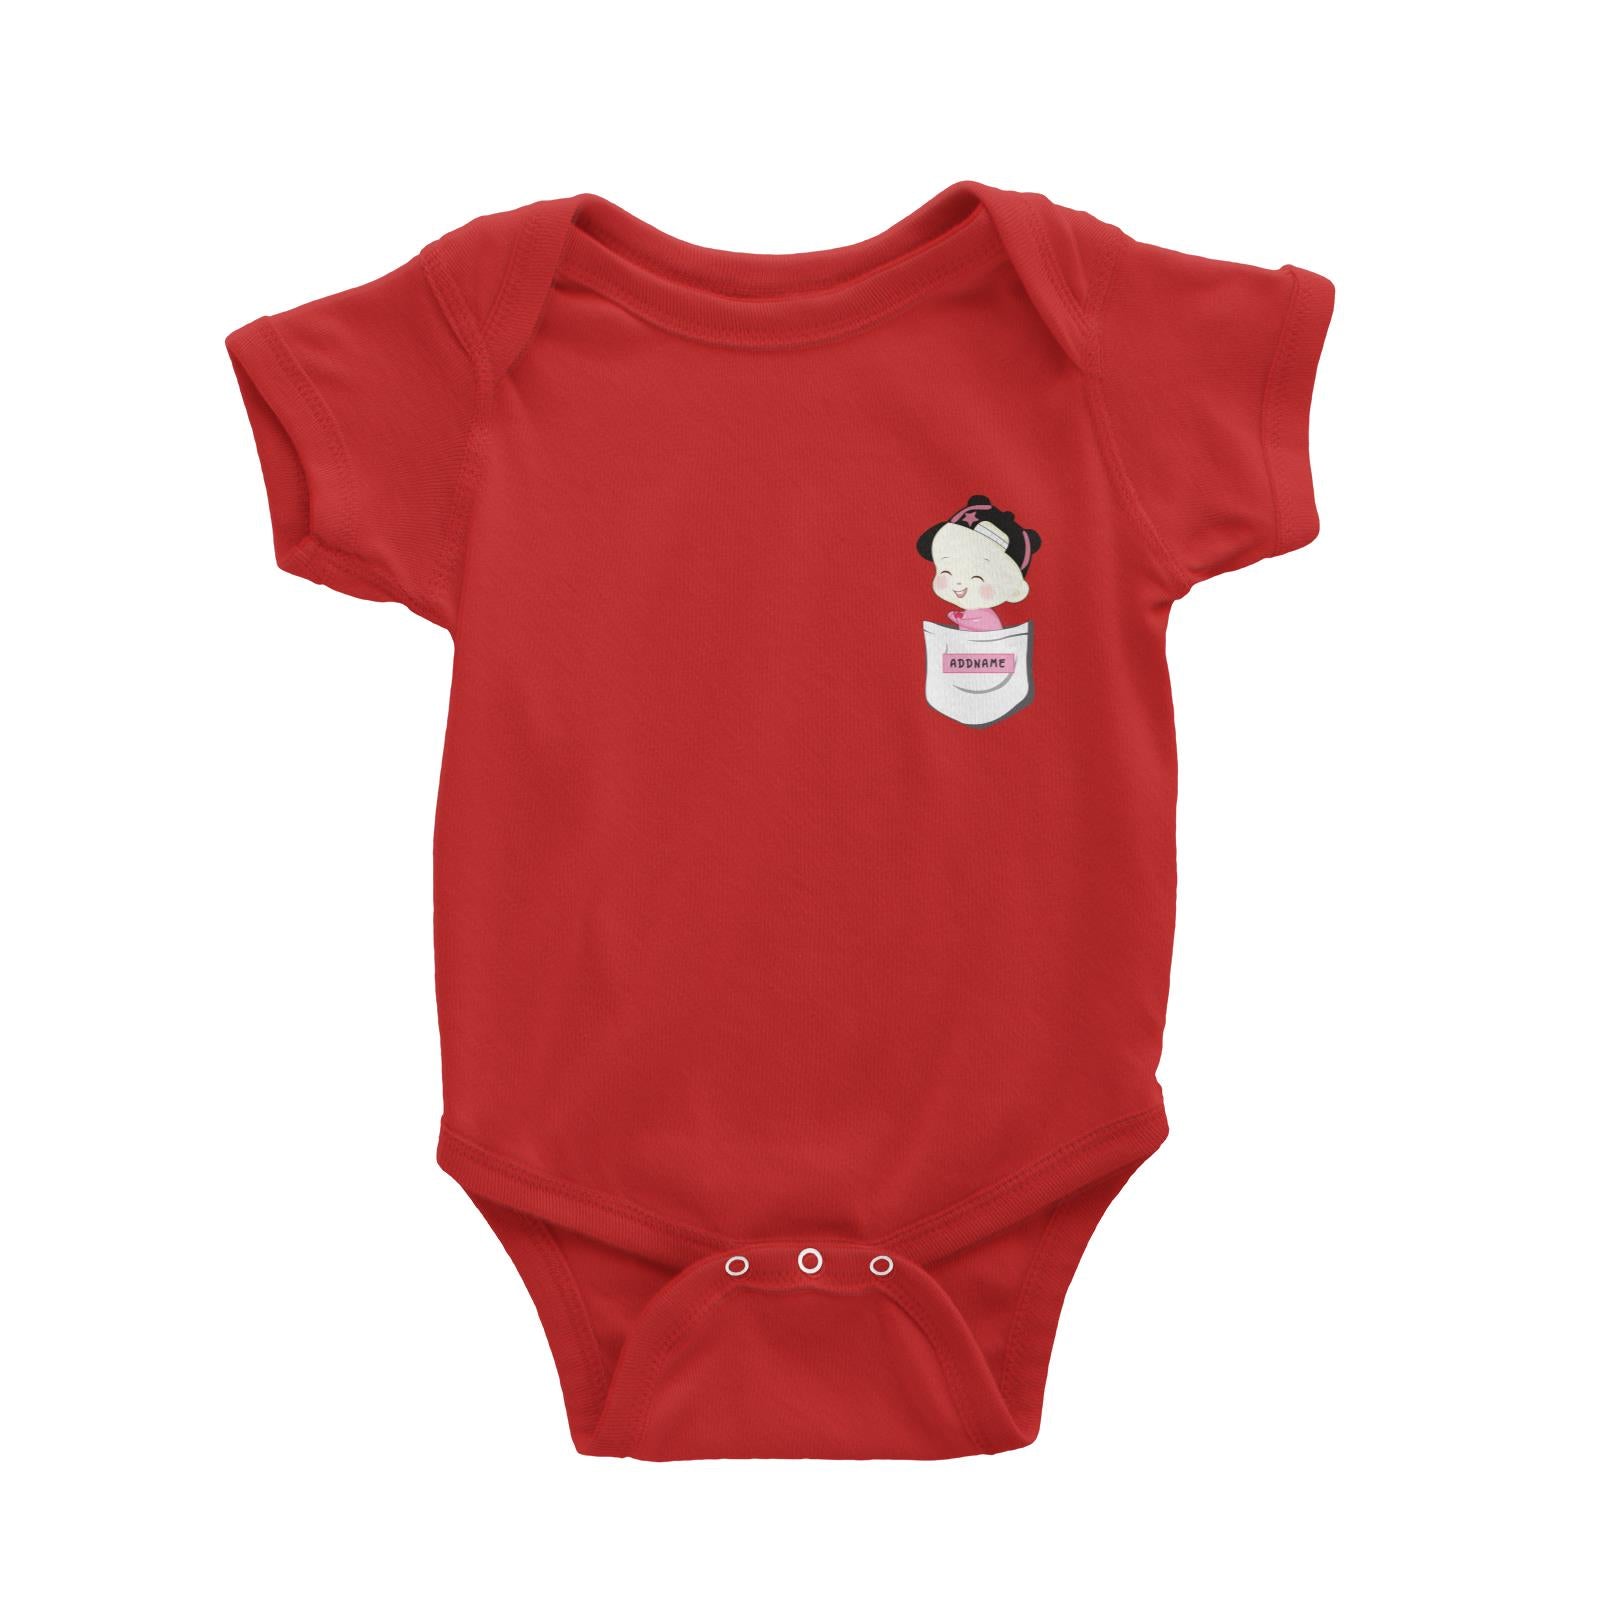 My Lovely Family Series Pocket Size Baby Girl Addname Baby Romper